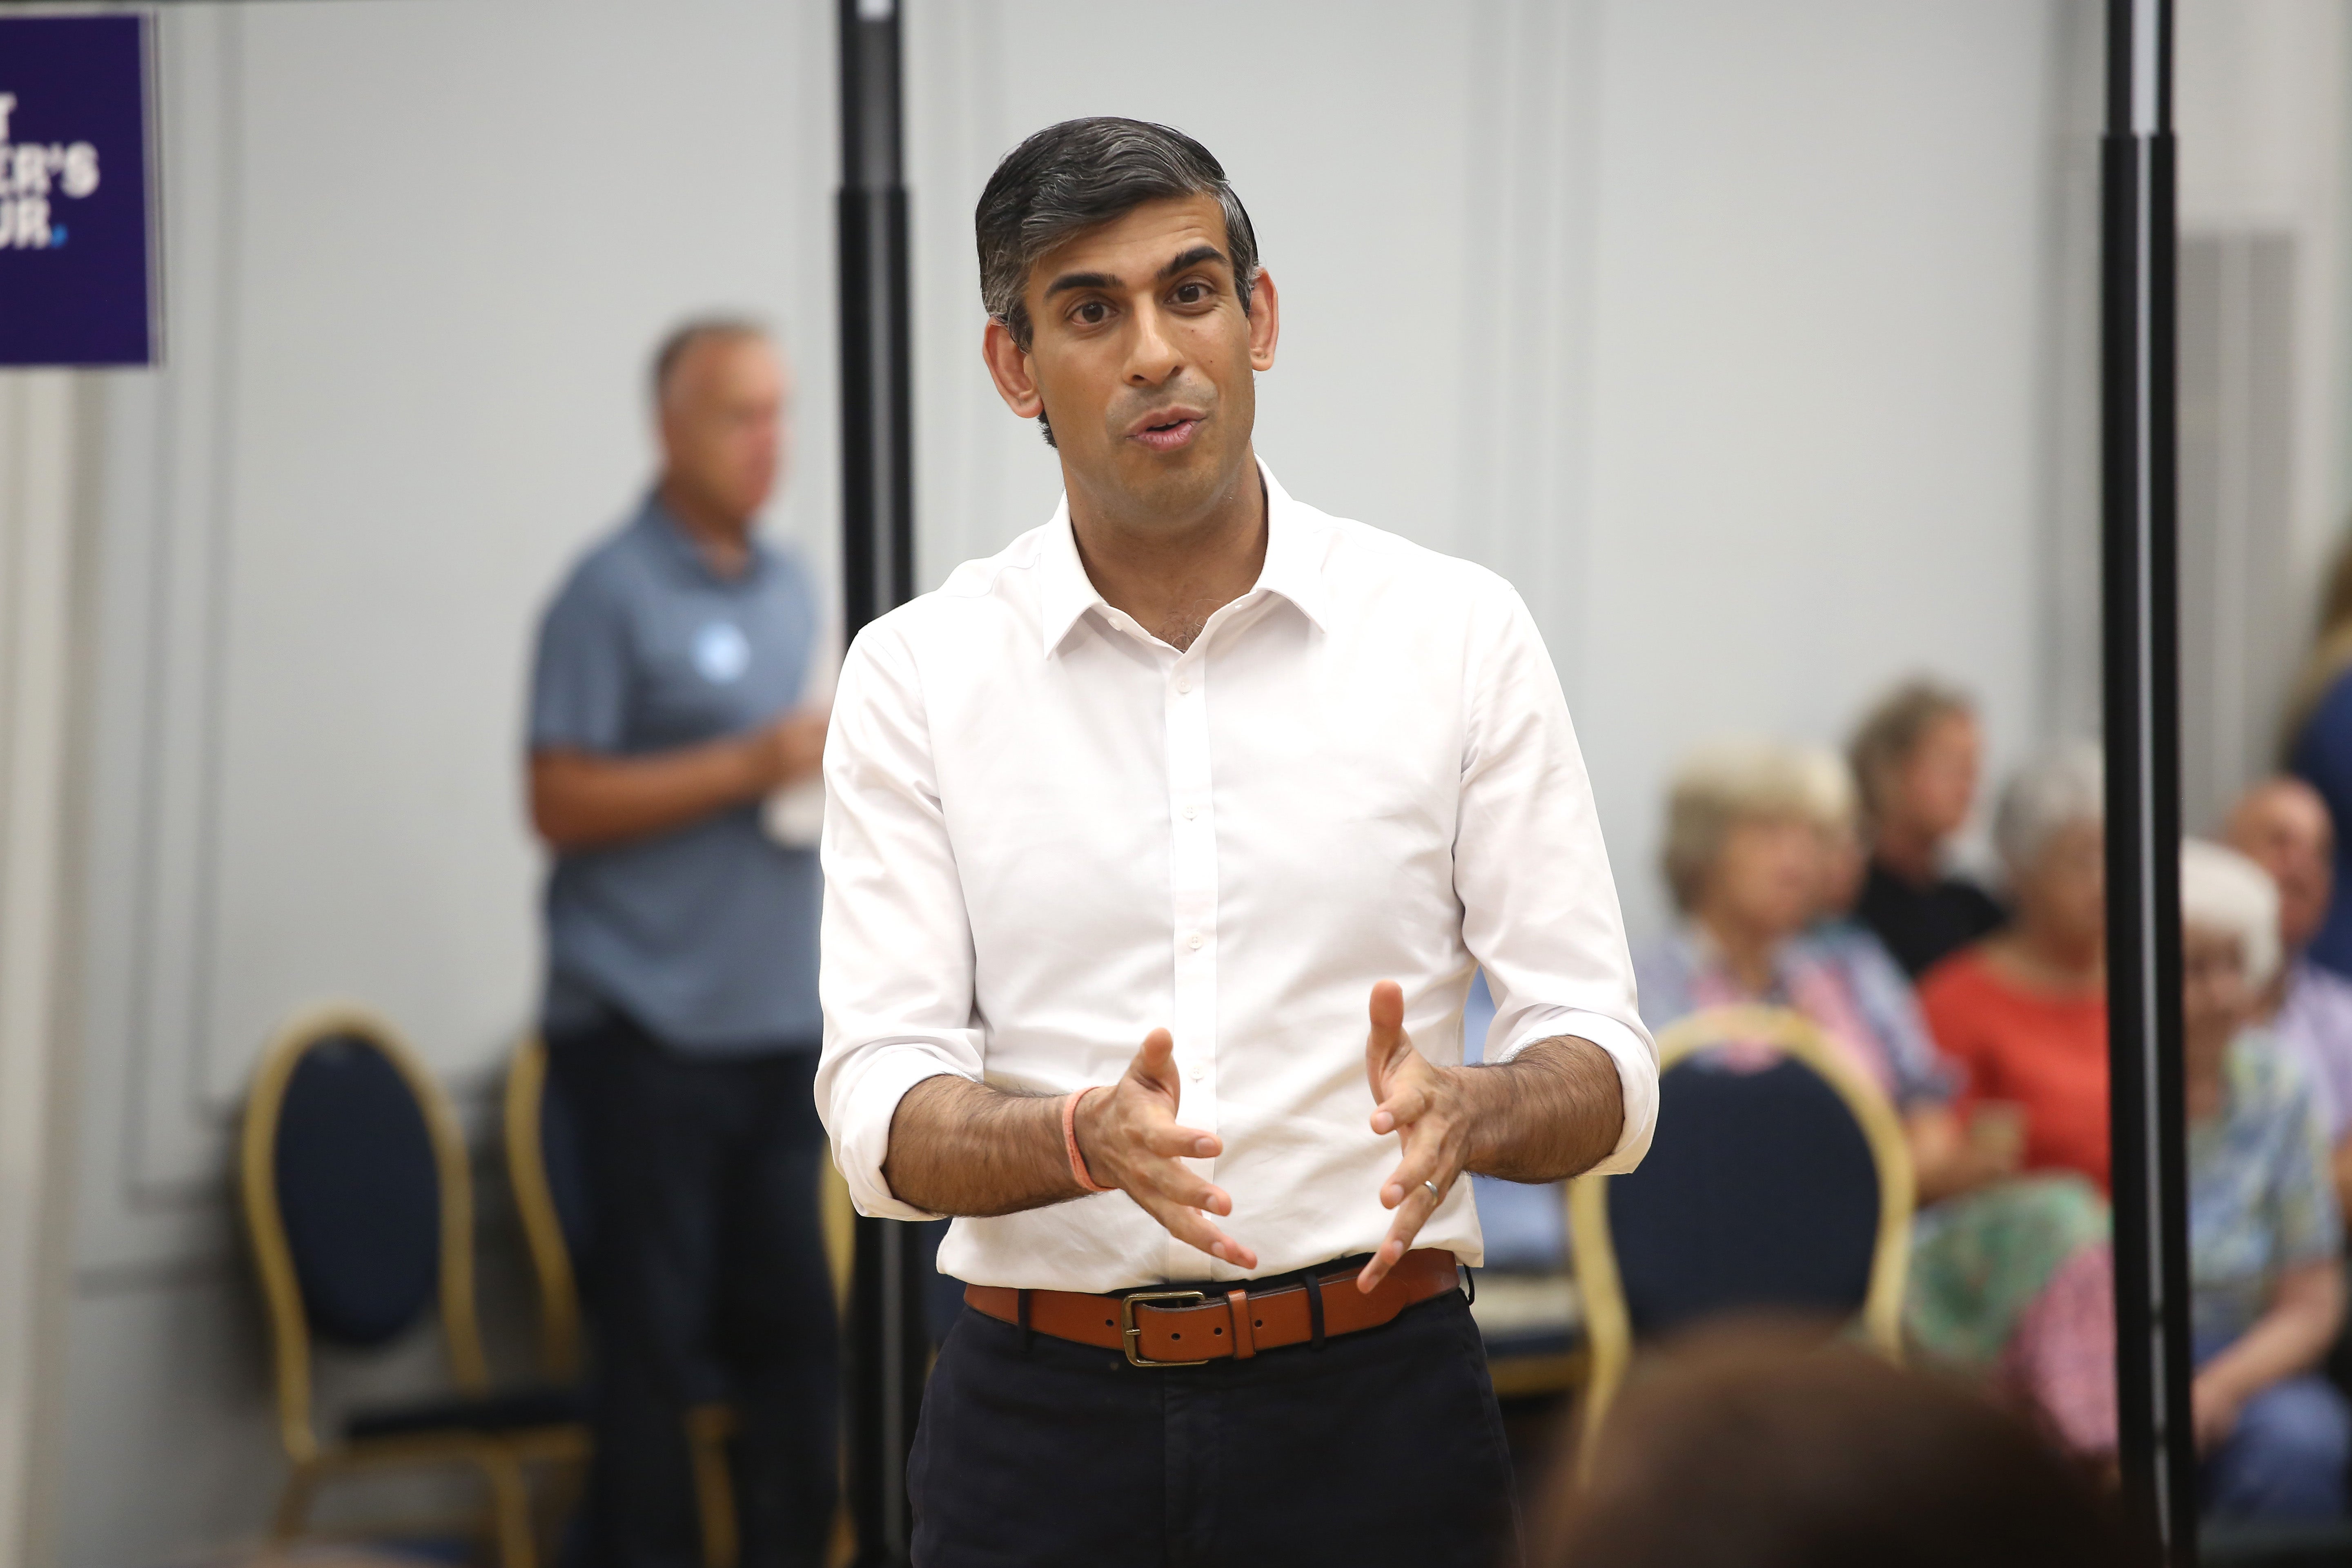 Rishi Sunak will describe the NHS backlog as the ‘biggest public service emergency’ the country faces